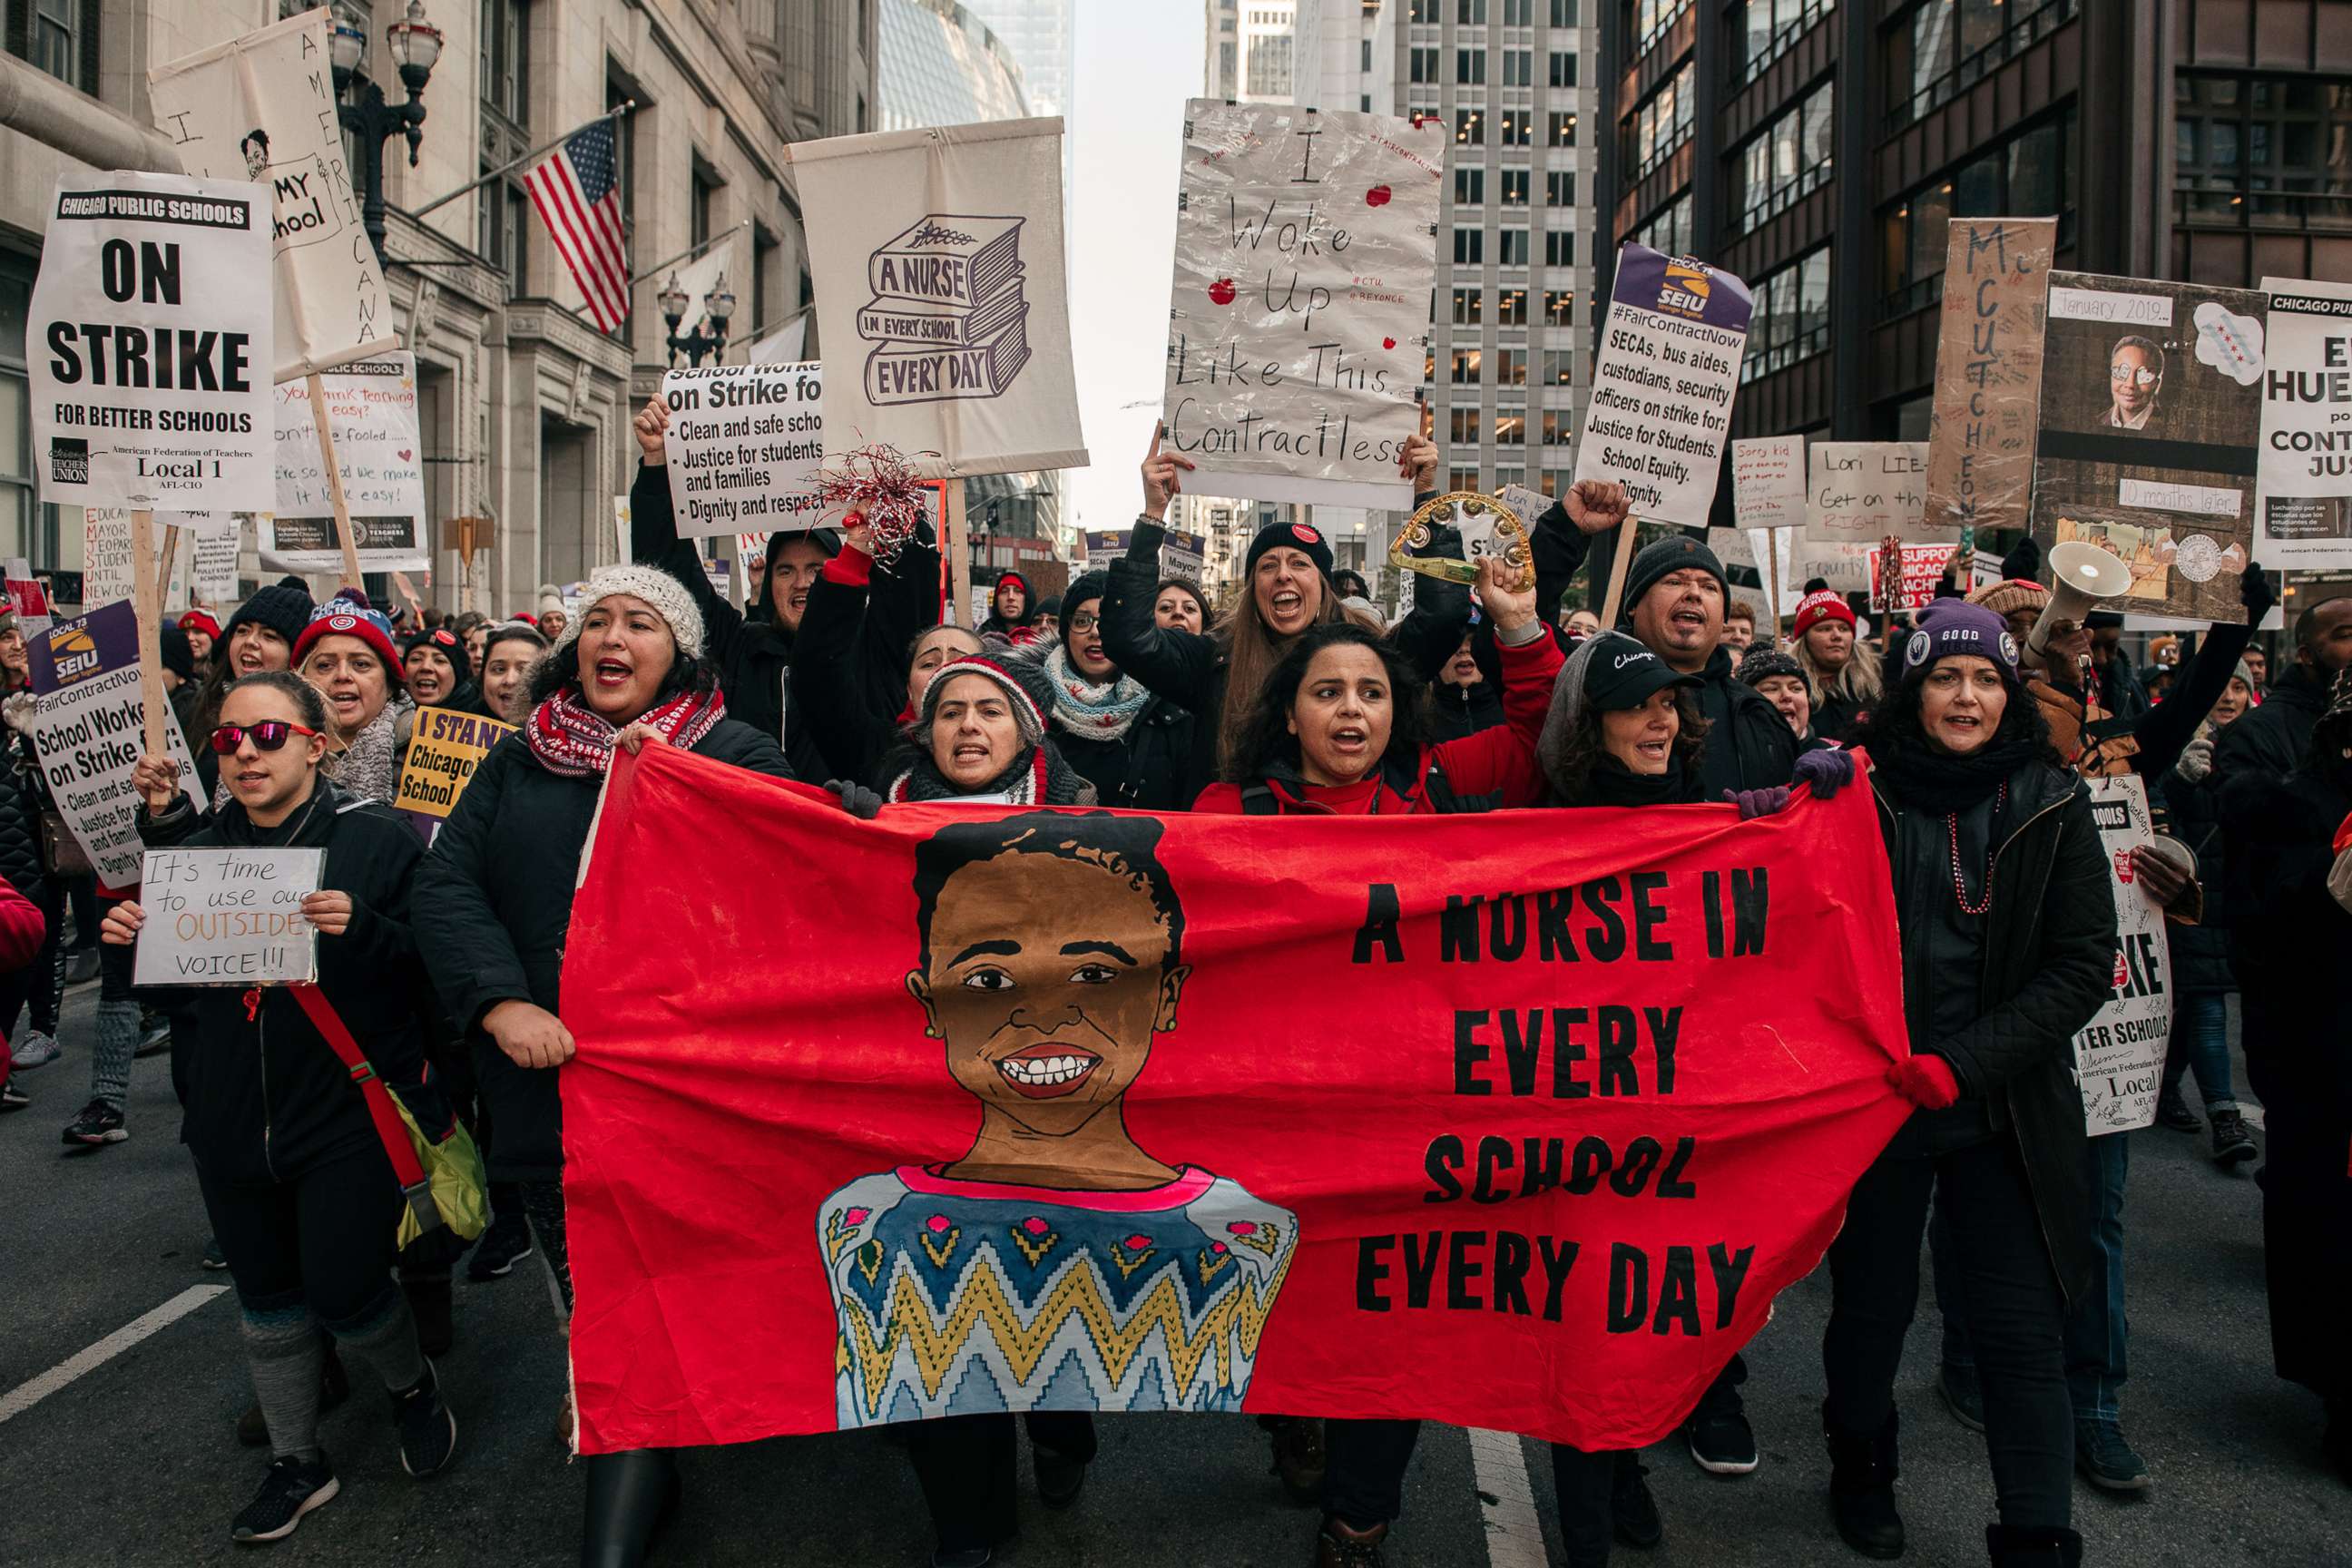 PHOTO: Thousands of demonstrators took to the streets of Downtown Chicago, stopping traffic and circling City Hall in a show support for the ongoing teachers strike on Oct. 23, 2019 in Chicago, I.L.